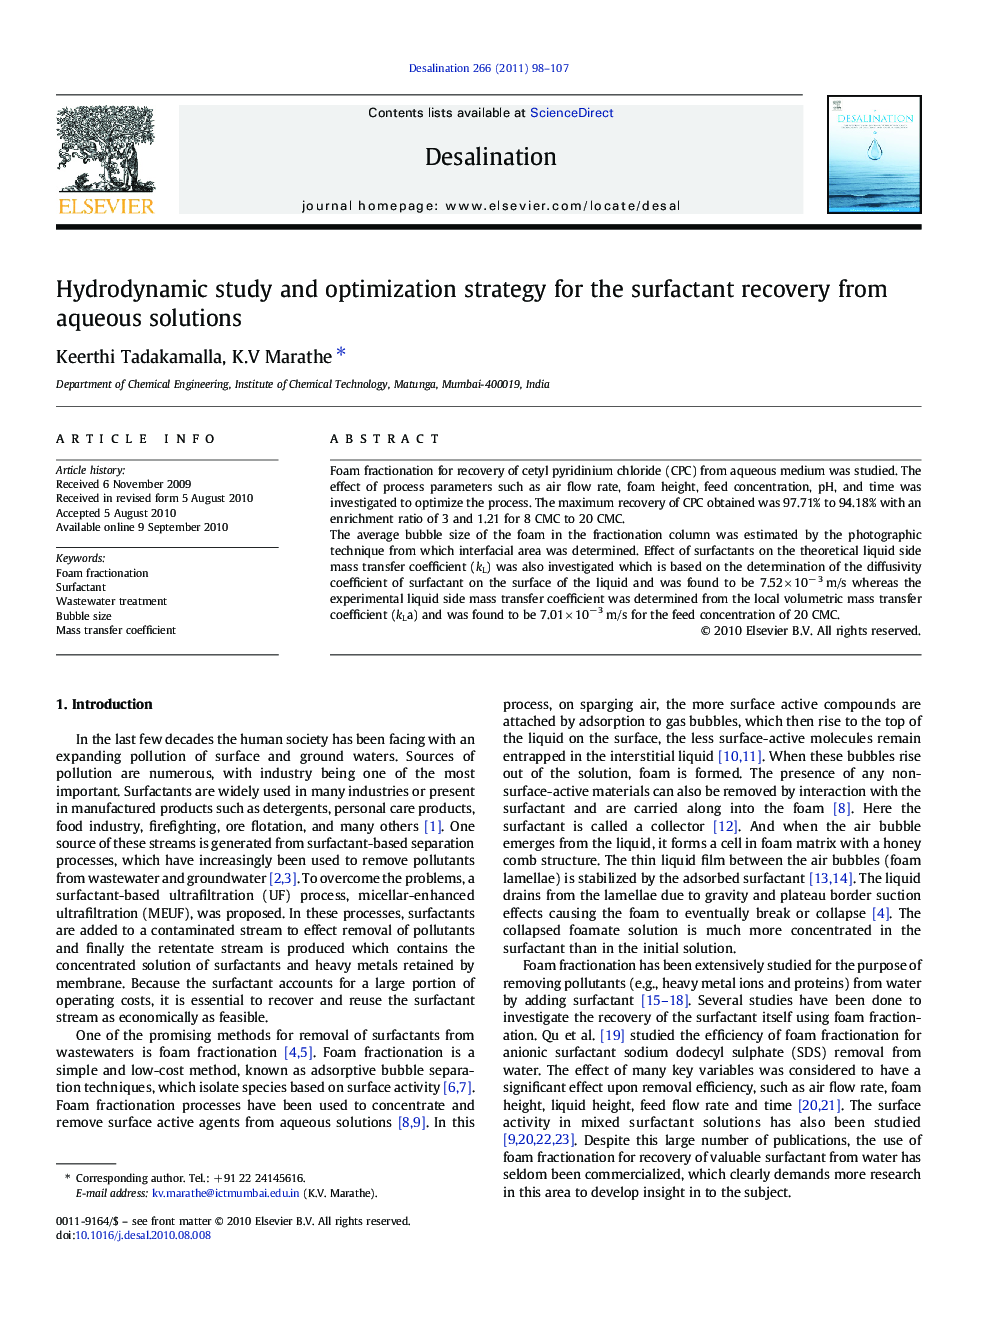 Hydrodynamic study and optimization strategy for the surfactant recovery from aqueous solutions